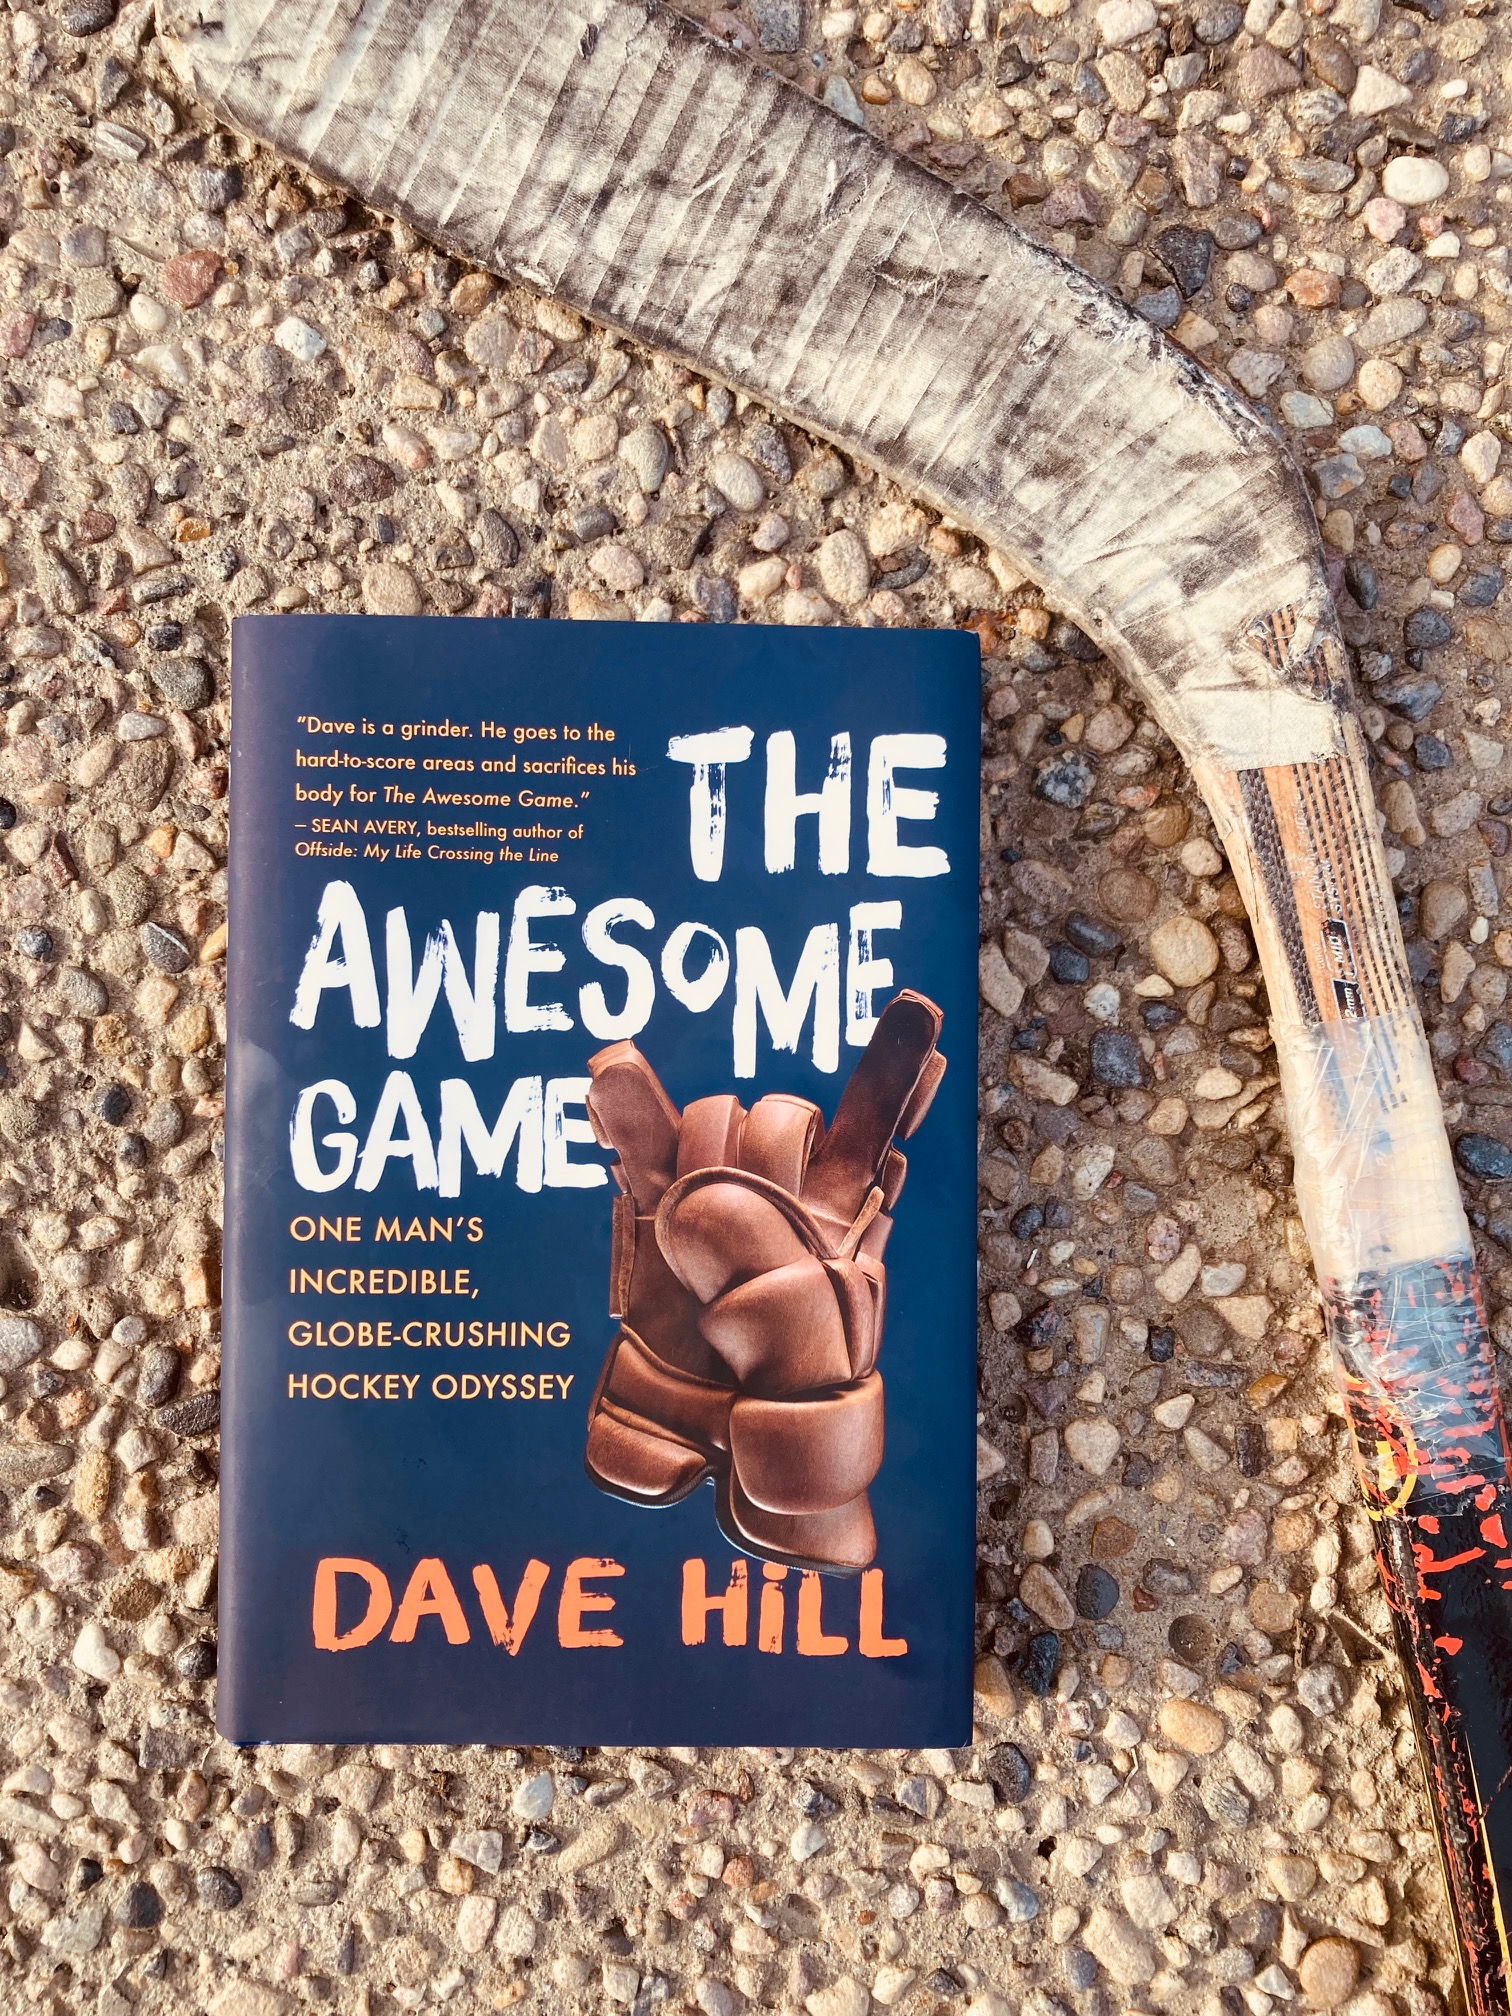 The Awesome Game by Dave Hill book pictured beside a taped up hockey stick